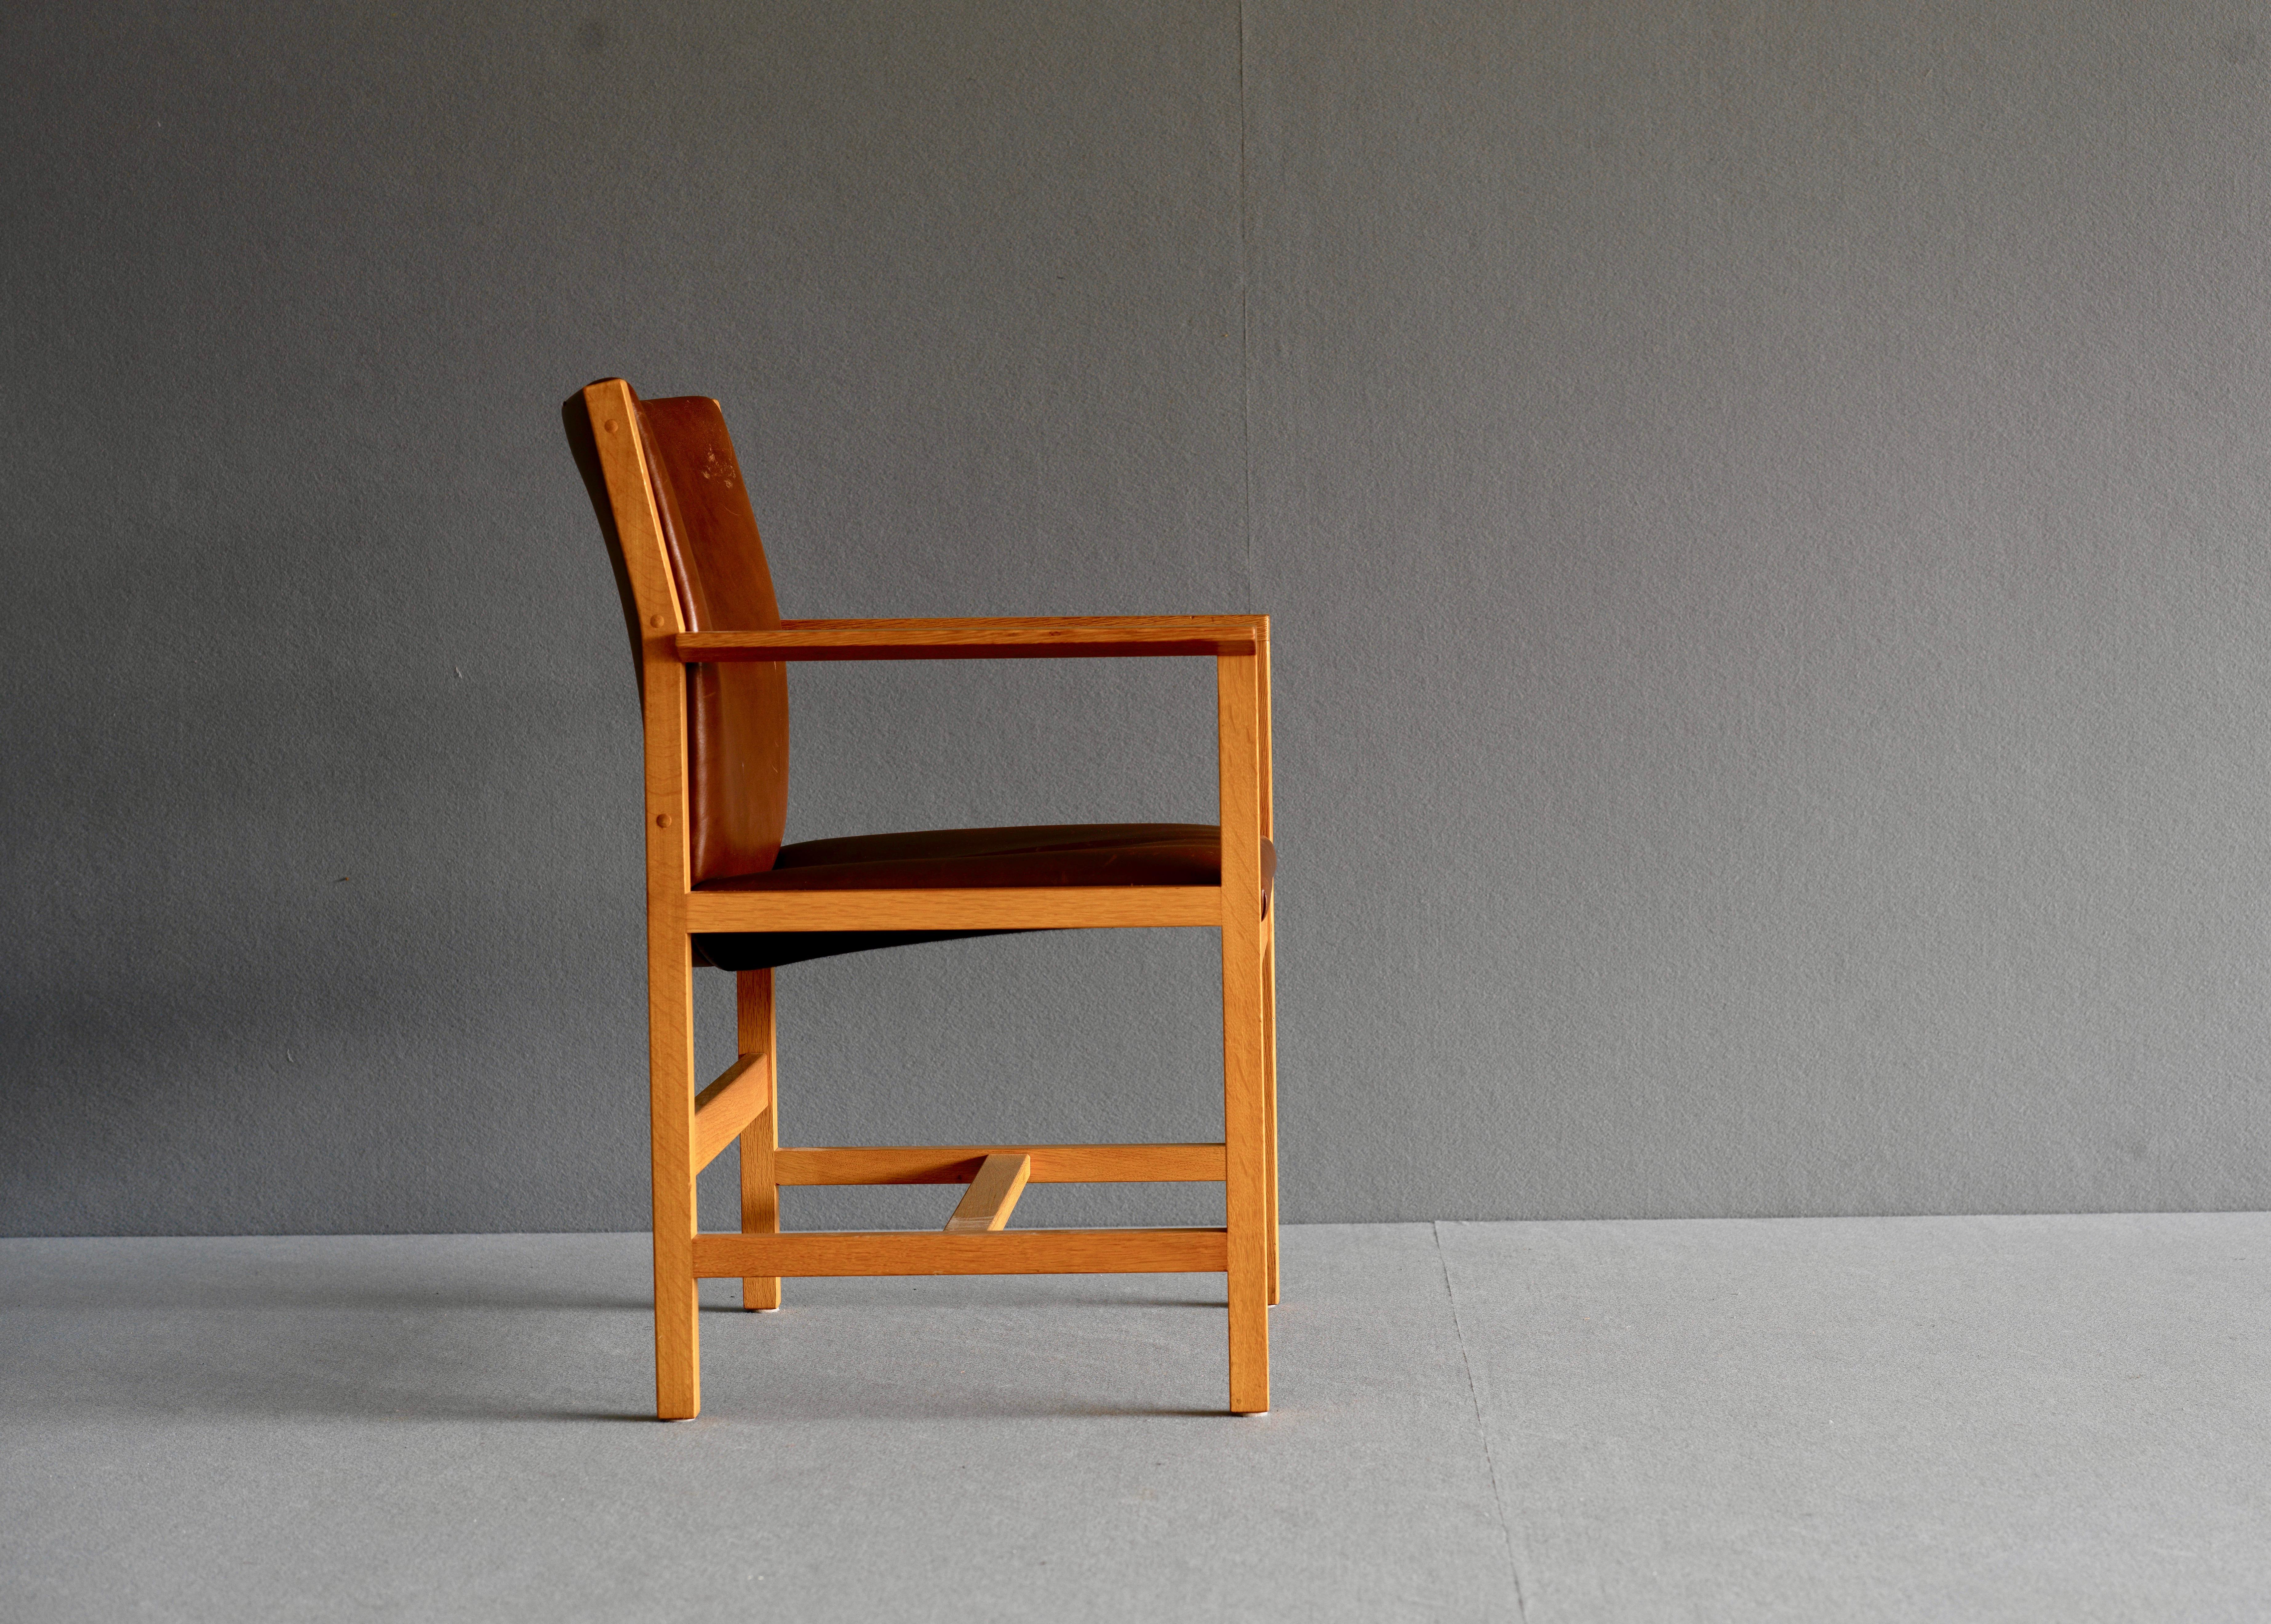 Chair, model “BM 73” byBorge Mogensen for Fredericia. This chair is in oak with brown leather upholstery. The original label remains. Circa 1978.

This chair was part of the private collection from the estate of Lennart and Barbro Nork. Mr Nork